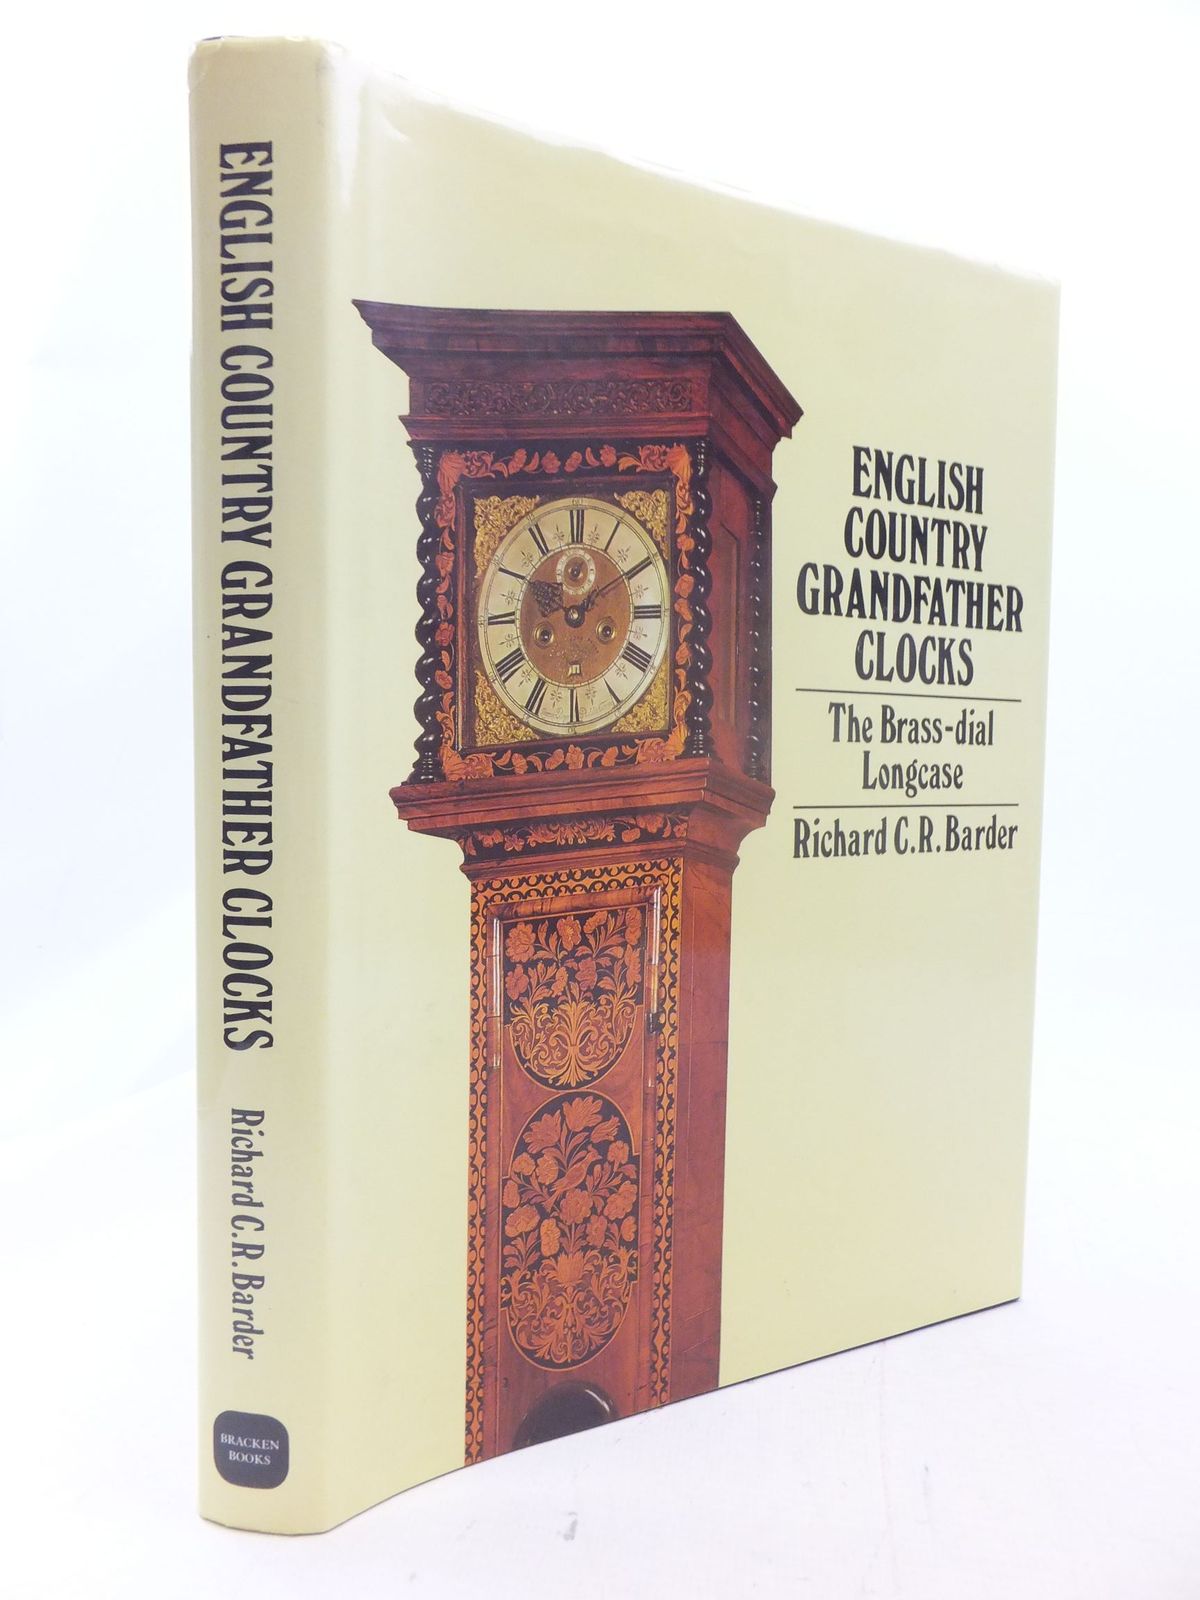 English Country Grandfather Clocks The Brass-dial Longcase